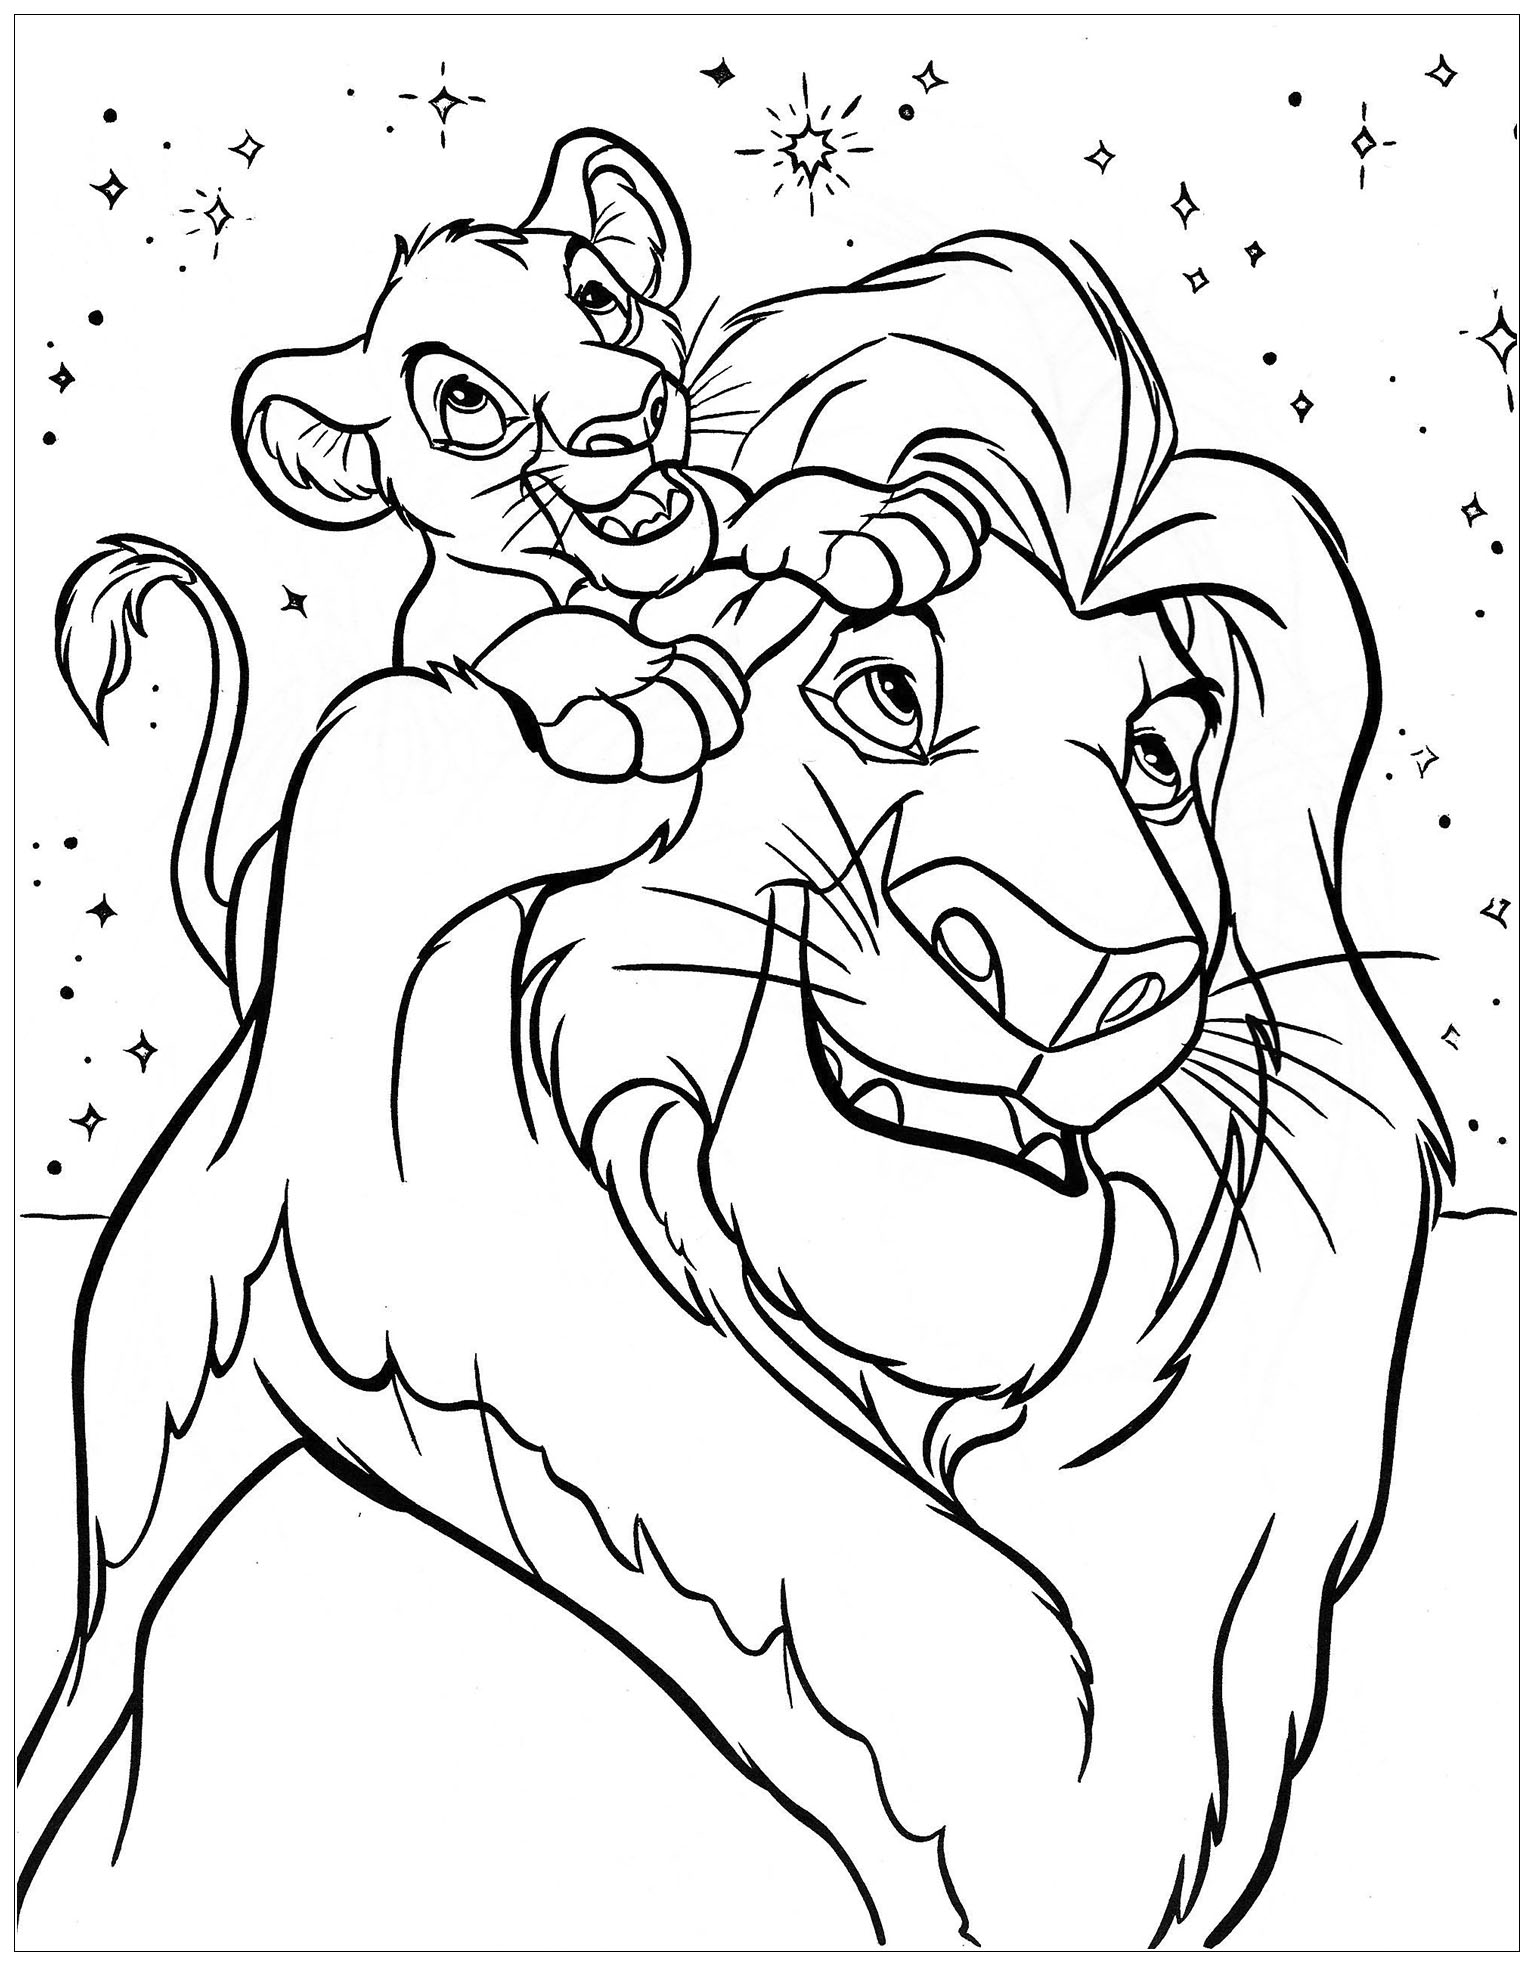 Mufasa With His Son Simba The Lion King Kids Coloring Pages